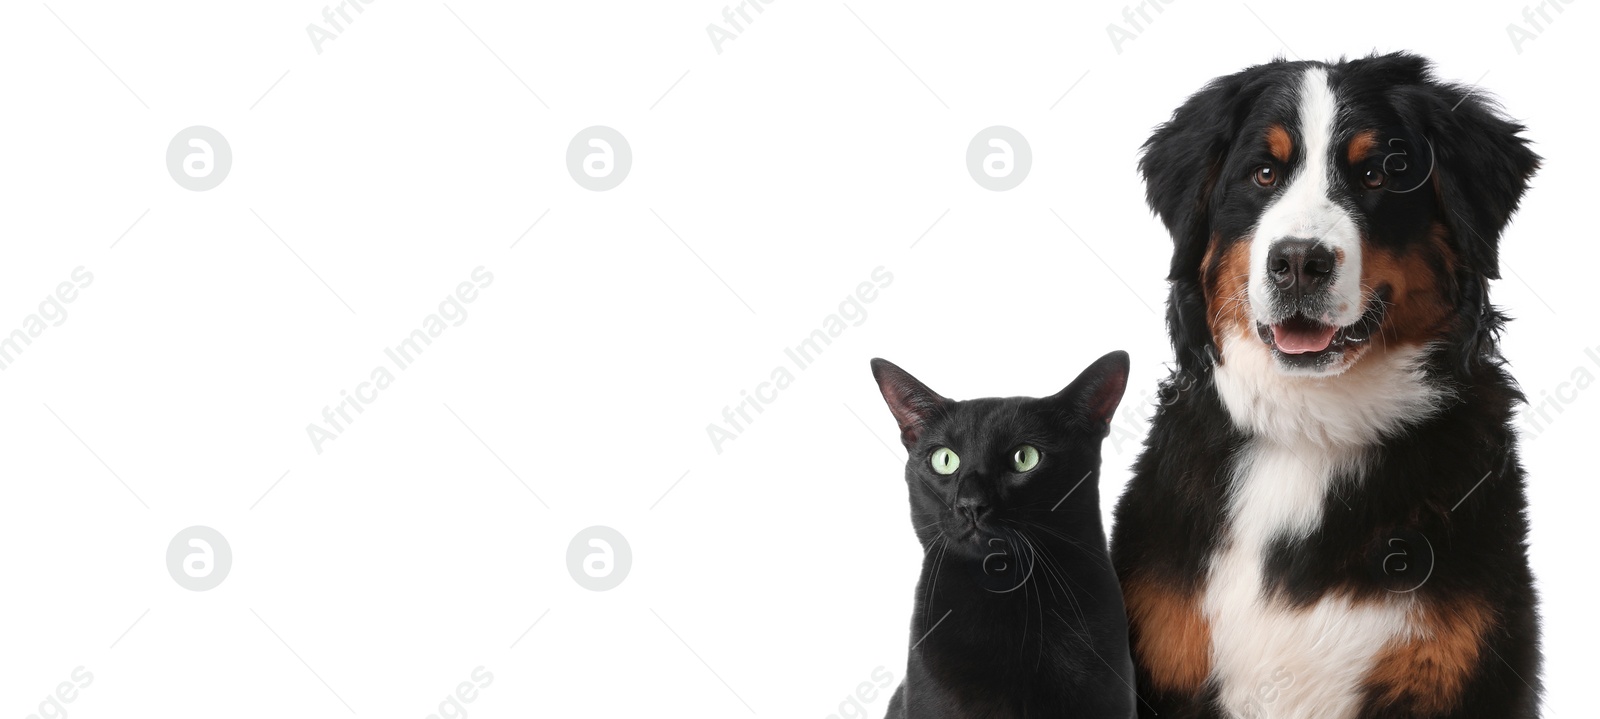 Image of Cute cat and adorable dog on white background. Banner design with space for text